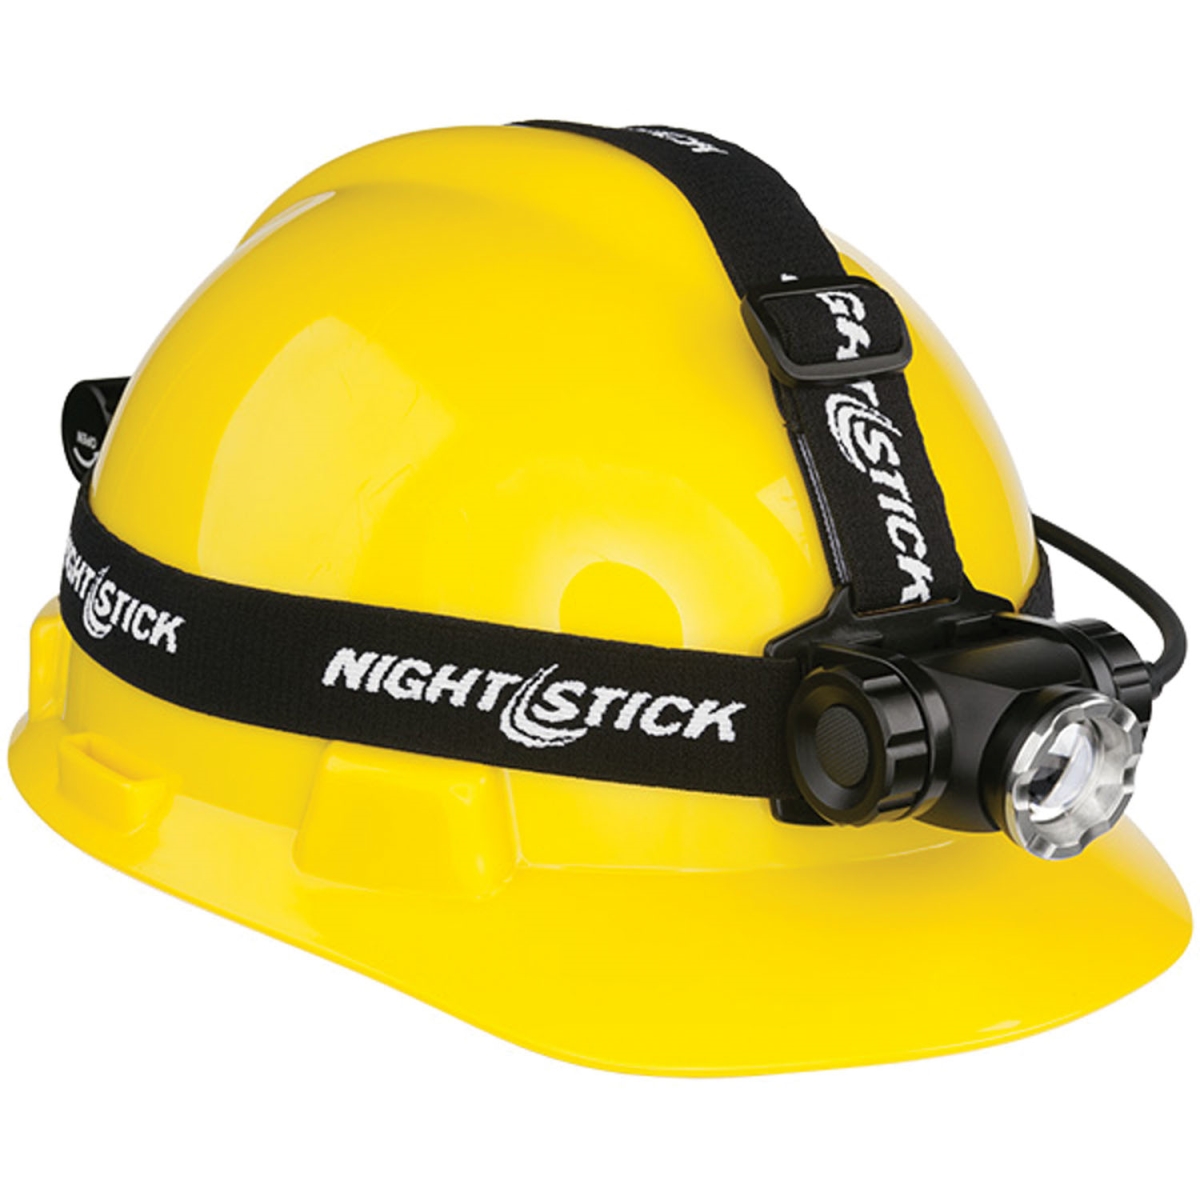 Bay-nsr-4708b Adjustment Beam Headlamp Rechargeable Lithium-ion